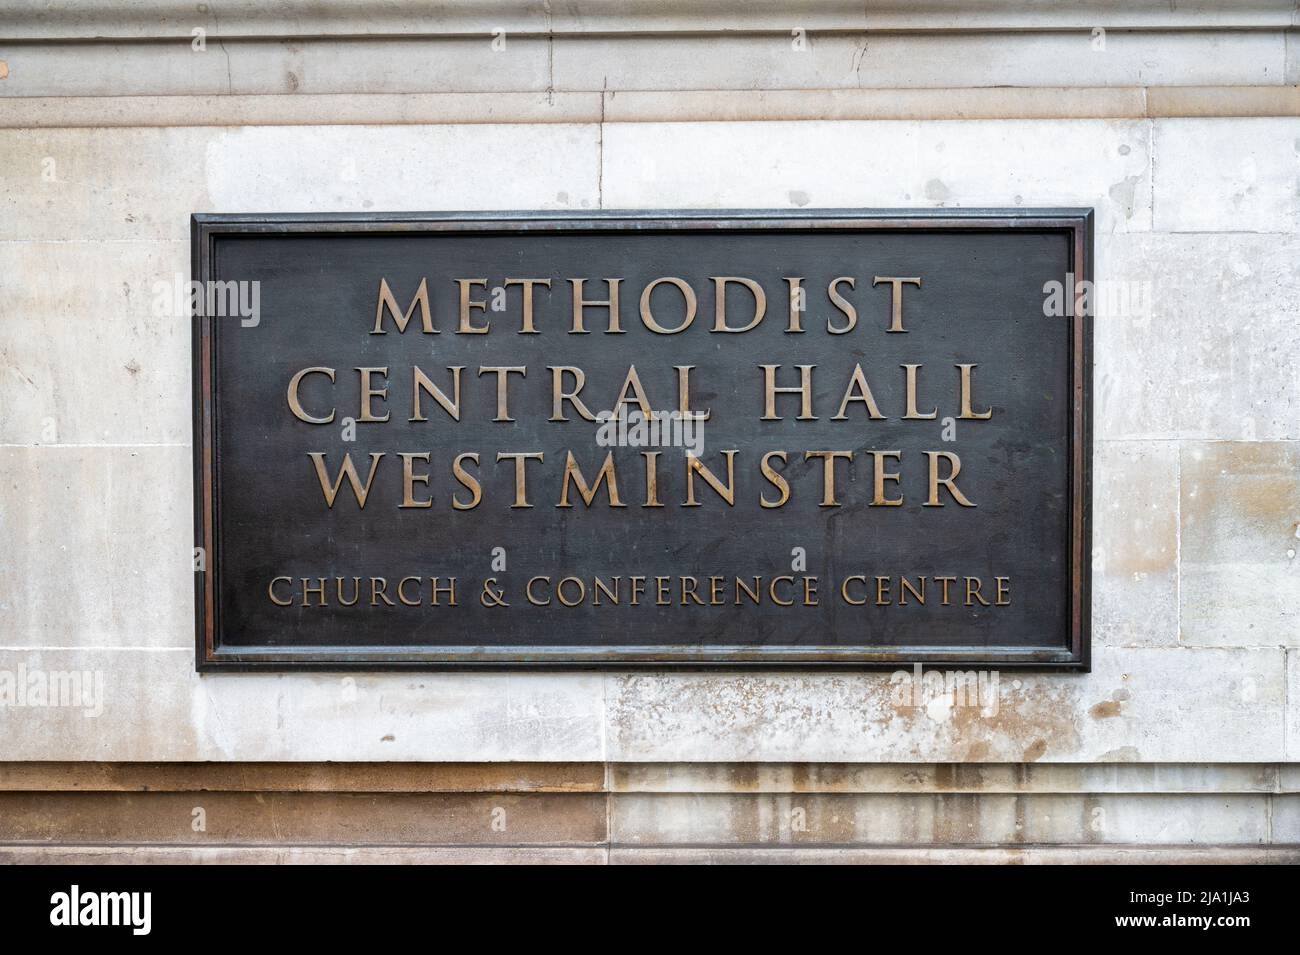 London, UK- May 3, 2022: The sign for Methodist Central Hall Westminster in London Stock Photo